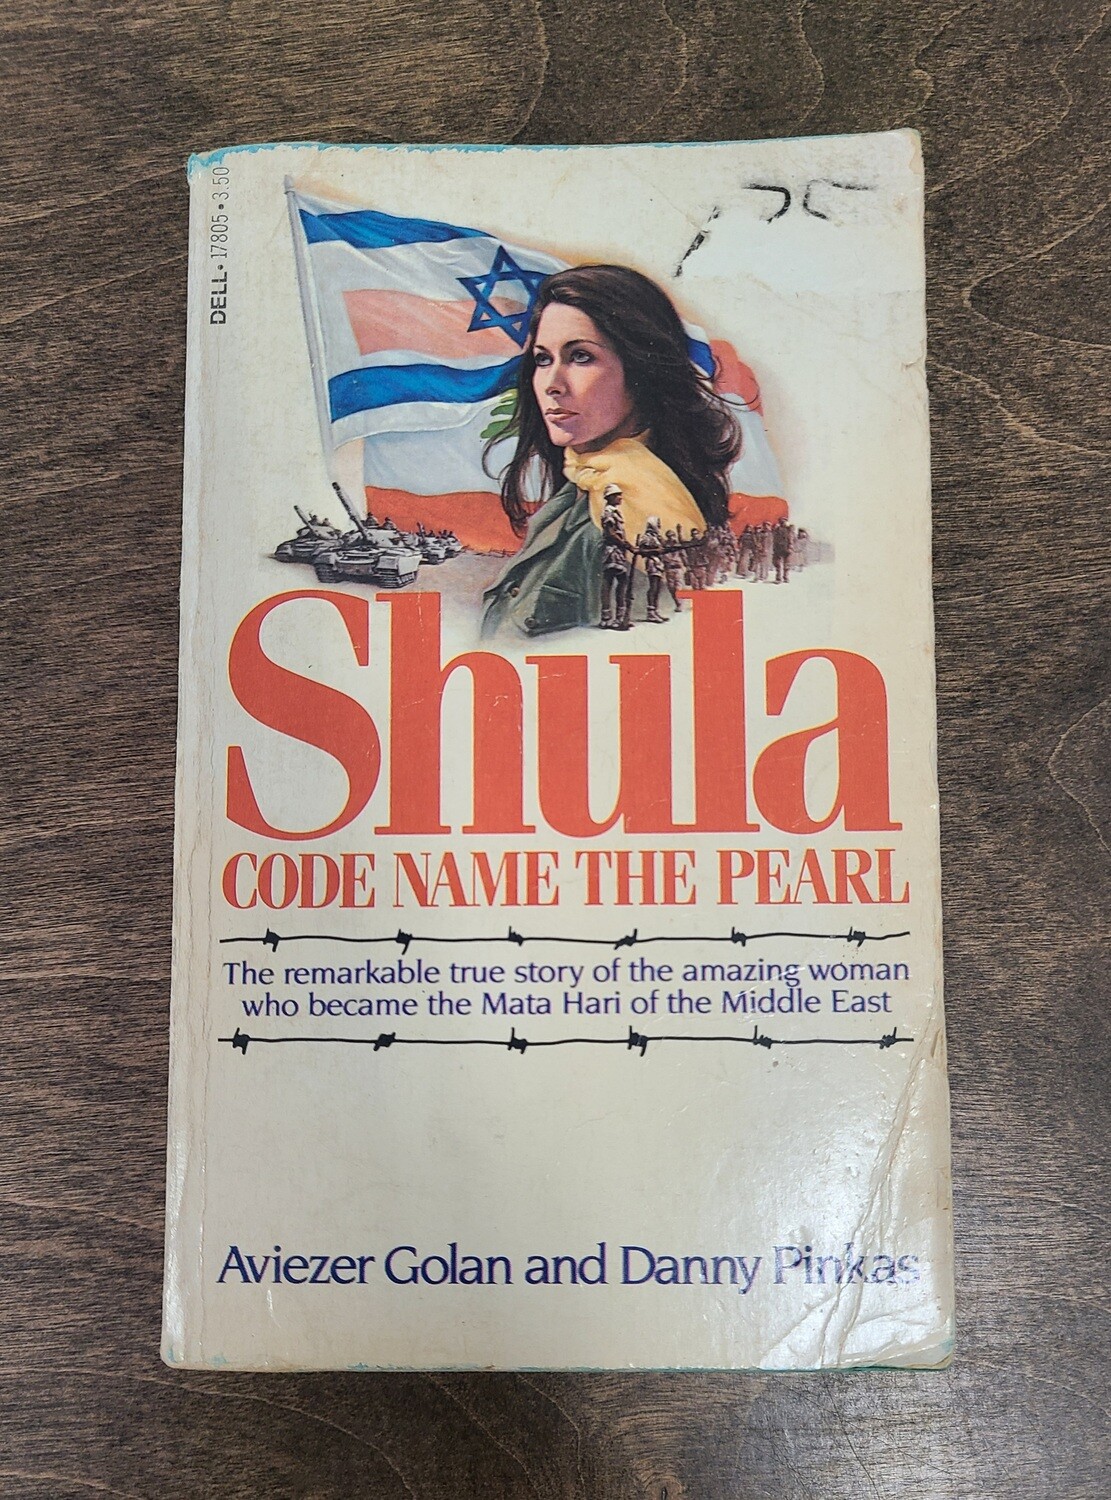 Shula: Code Name the Pearl by Aviezer Golan and Danny Pinkas